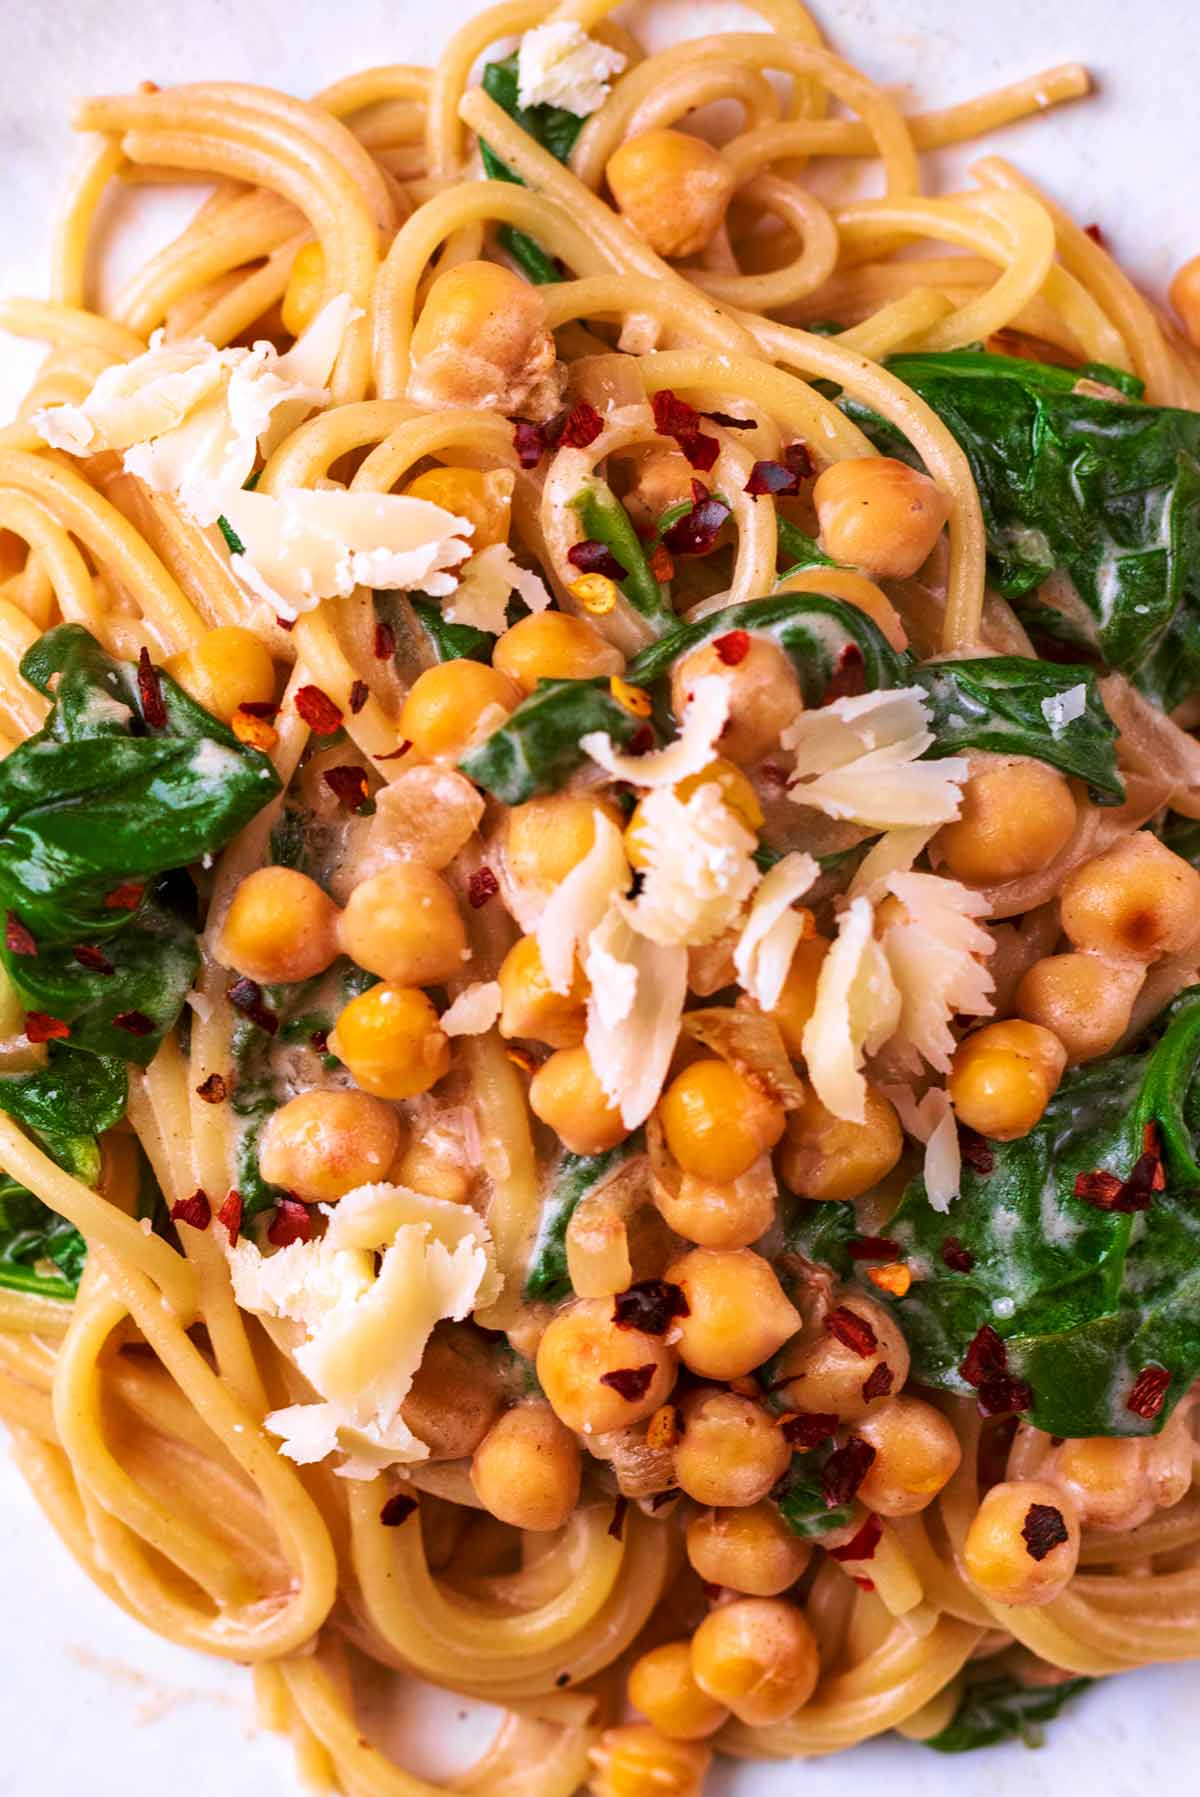 Chickpeas and spinach in a creamy sauce mixed with spaghetti.